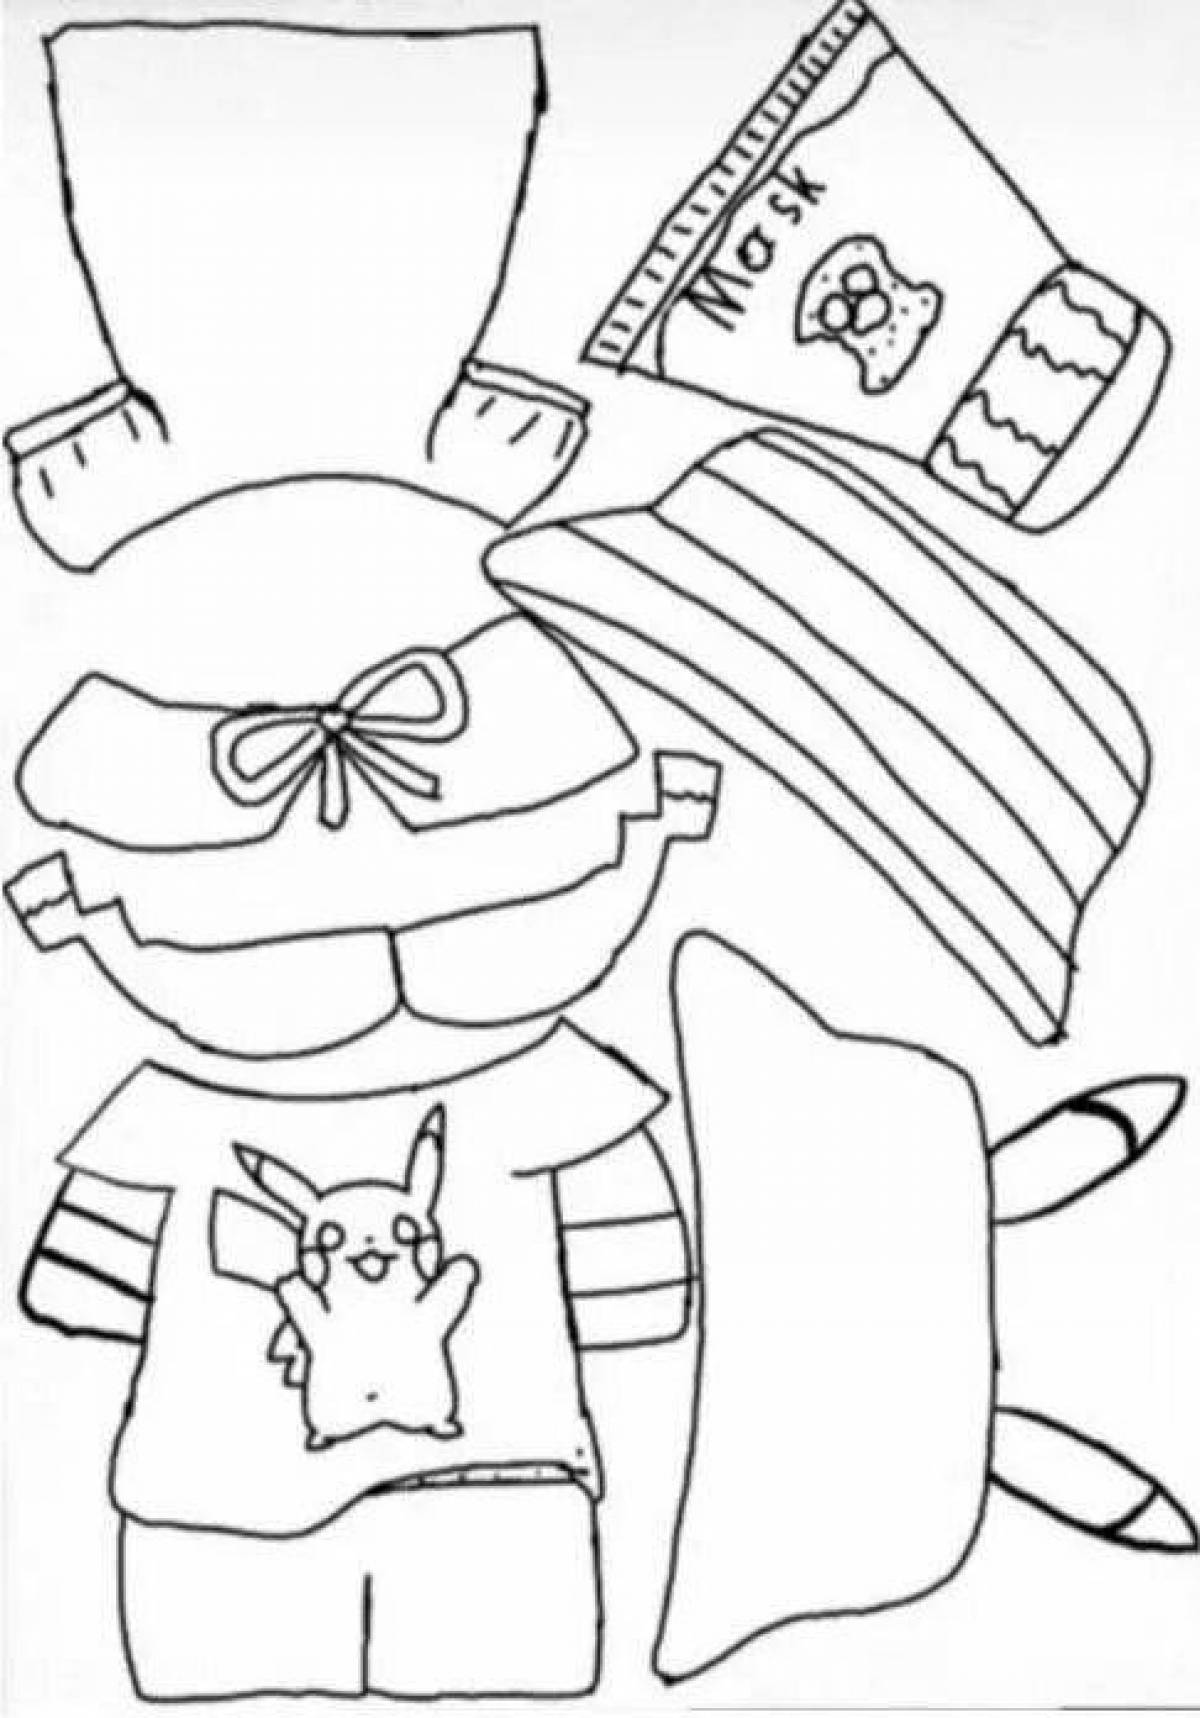 Charming lalafan coloring book with clothes